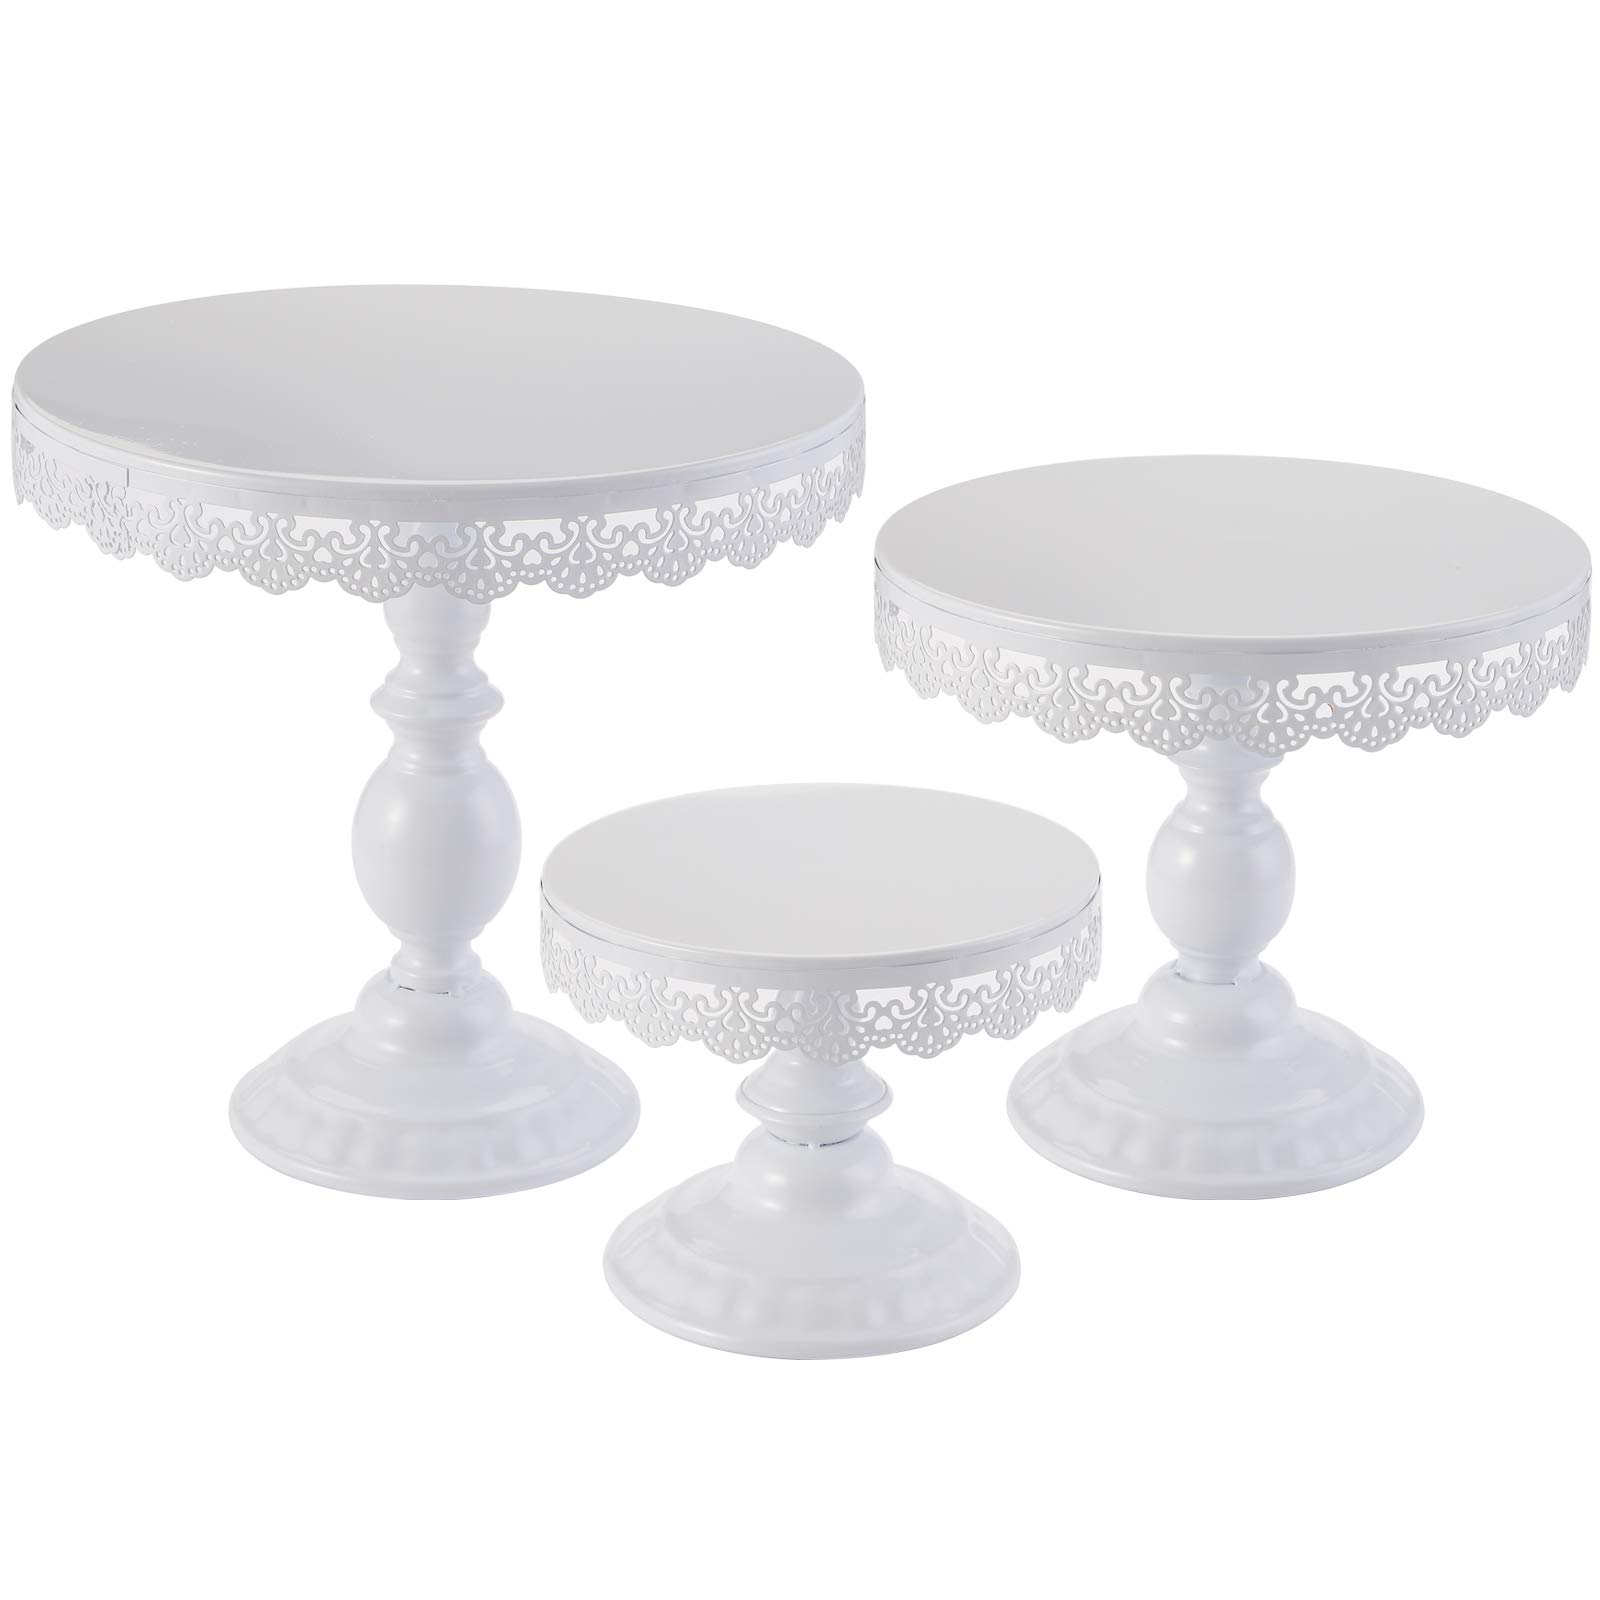 TOPZEA Set of 3 Cake Stands, 8" & 10" & 12" Round Cupcake Display Metal Dessert Cake Holders for Weddings, Birthday Party, Baby Shower, Anniversary, White